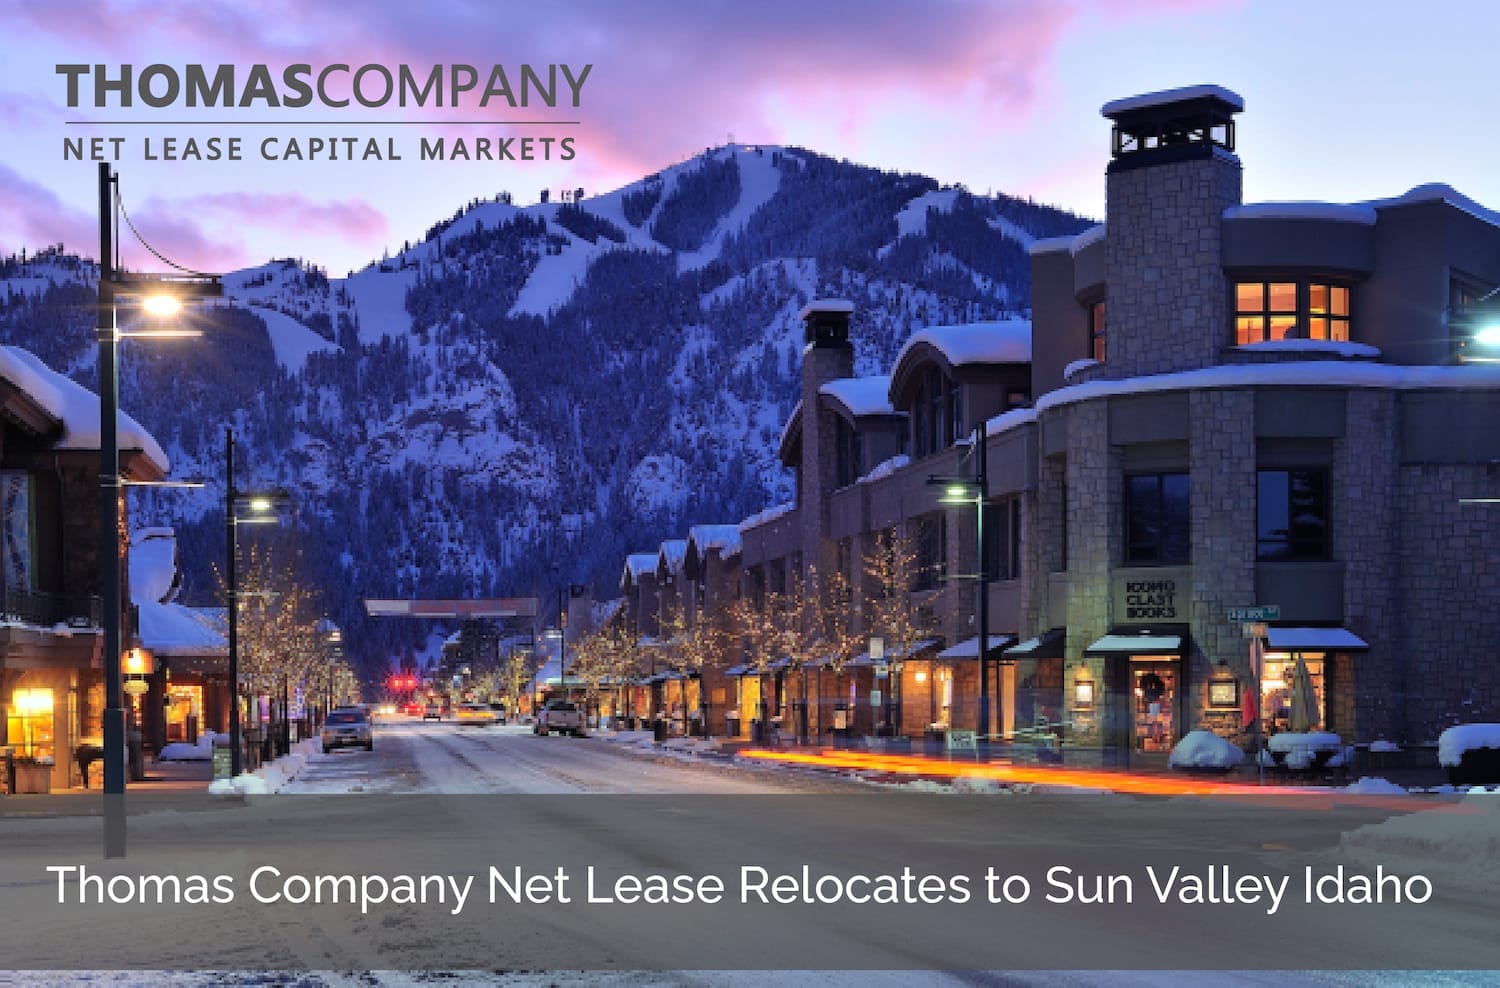 Sunset view of Sun Valley, Idaho, with snow-covered mountains in the background and lit-up street and buildings in the foreground, featuring the Thomas Company logo and announcement text about their relocation to Sun Valley